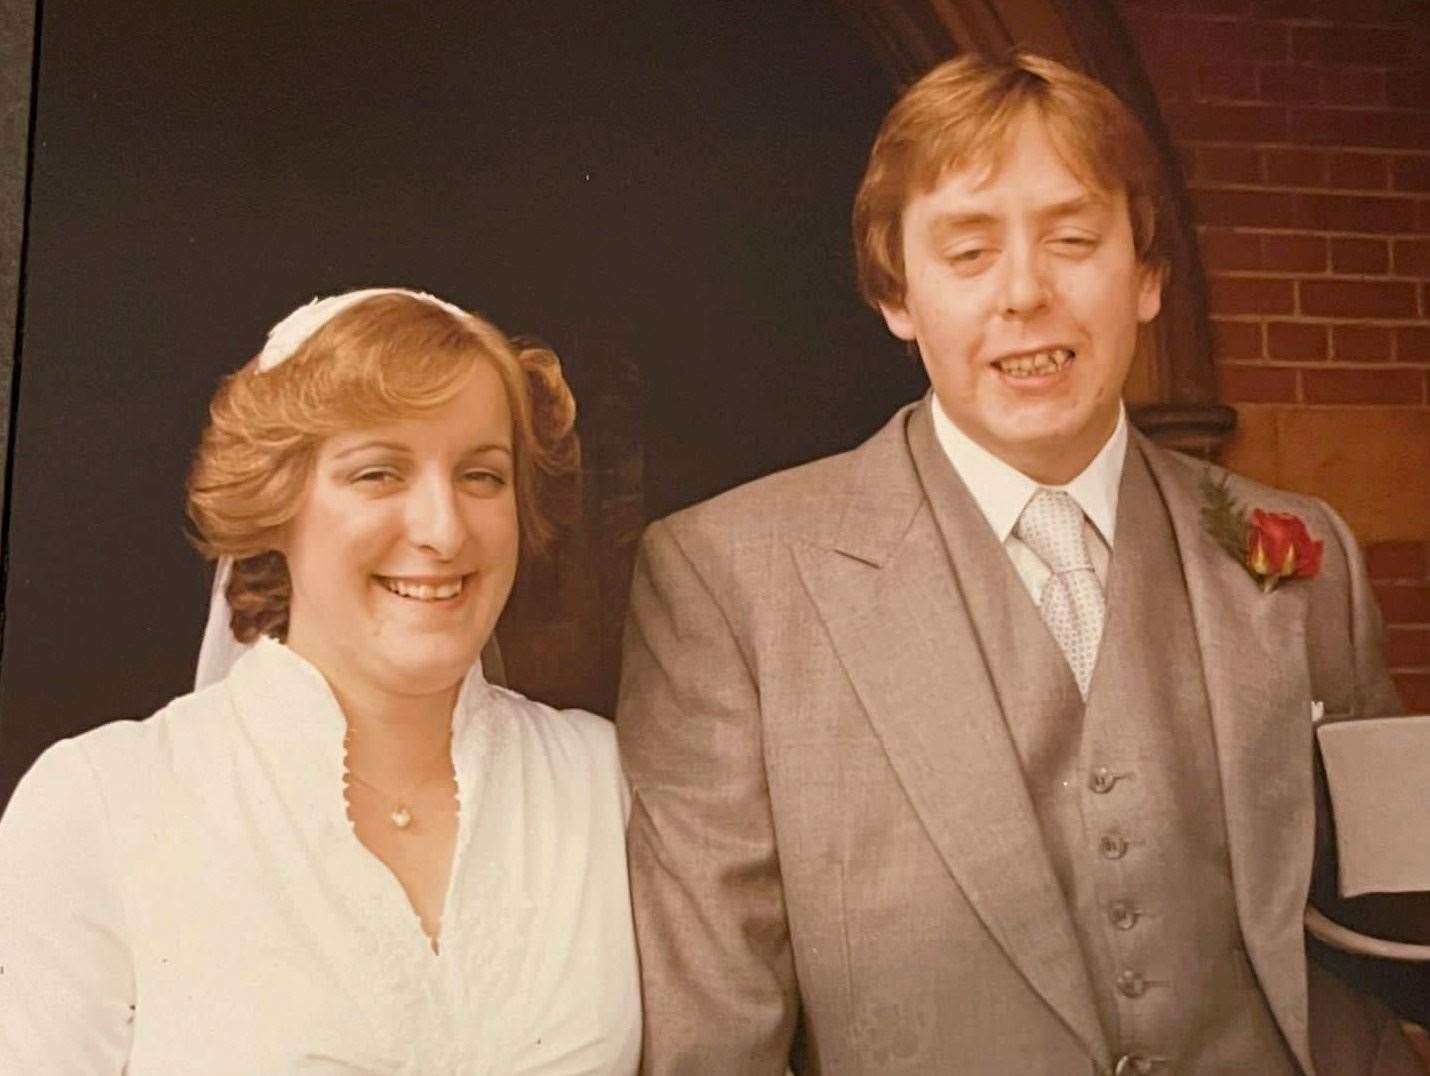 The couple at their original wedding 42 years ago. Picture: SWNS